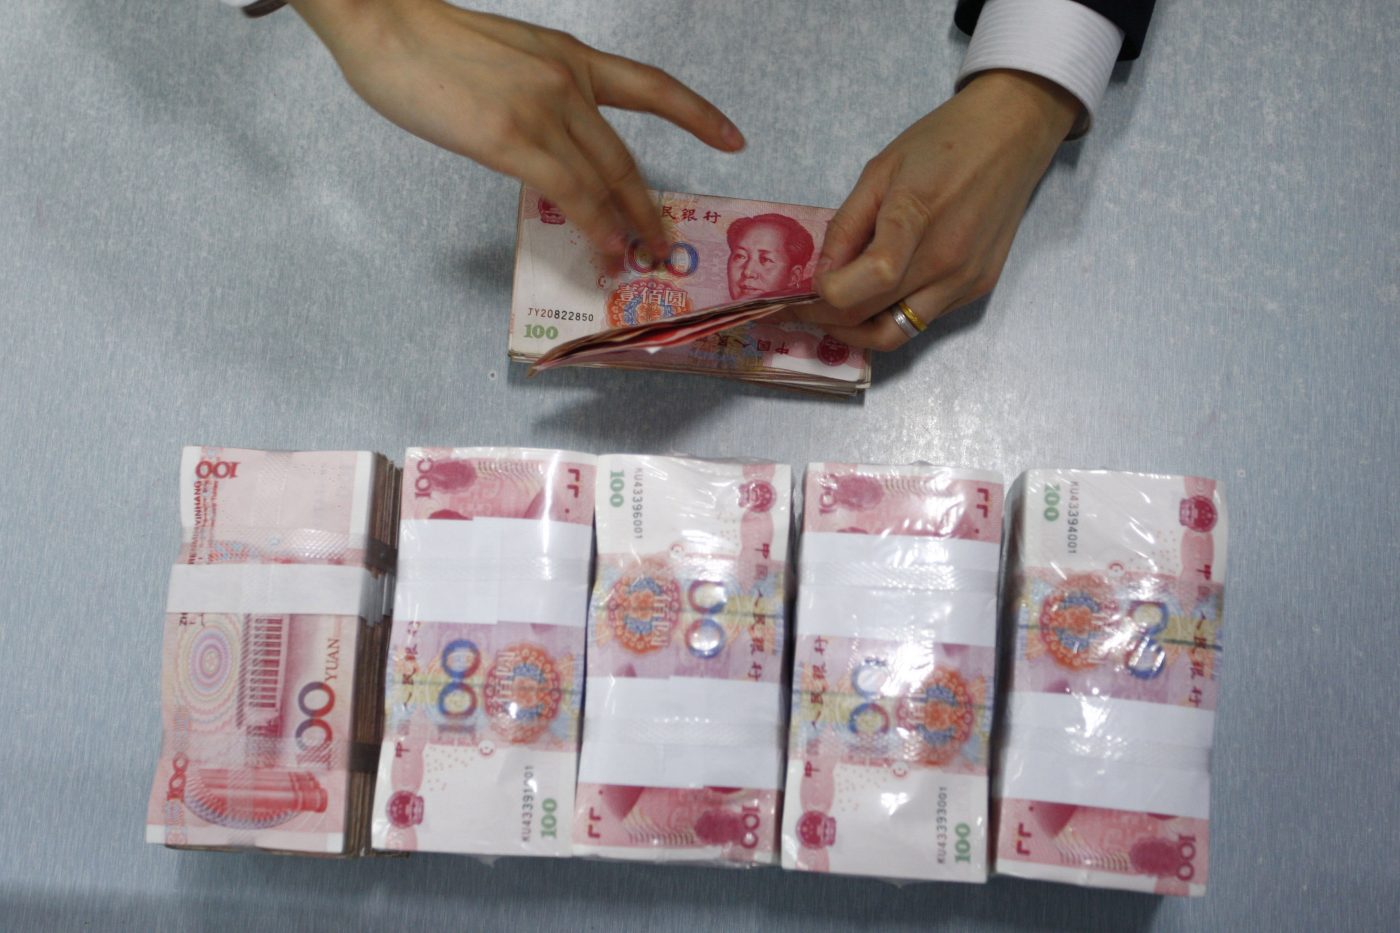 Photo: An employee counts Renminbi banknotes at a branch of Suining Commercial Bank, Sichuan province February 4, 2010. Credit: REUTERS/Stringer